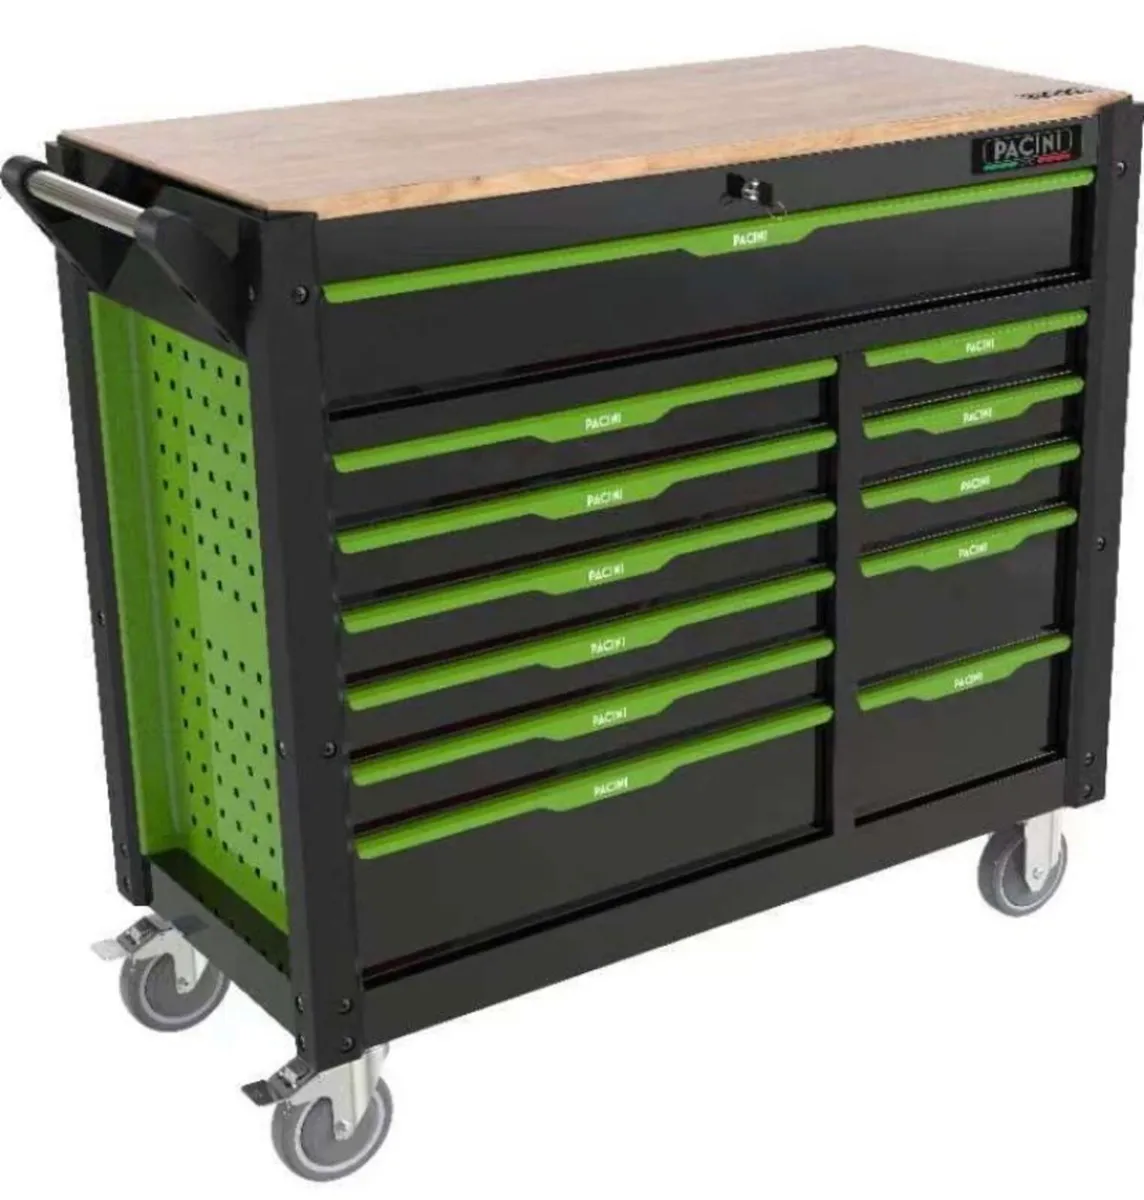 PACINI 42Inch 12DRAWER TOOL CHEST